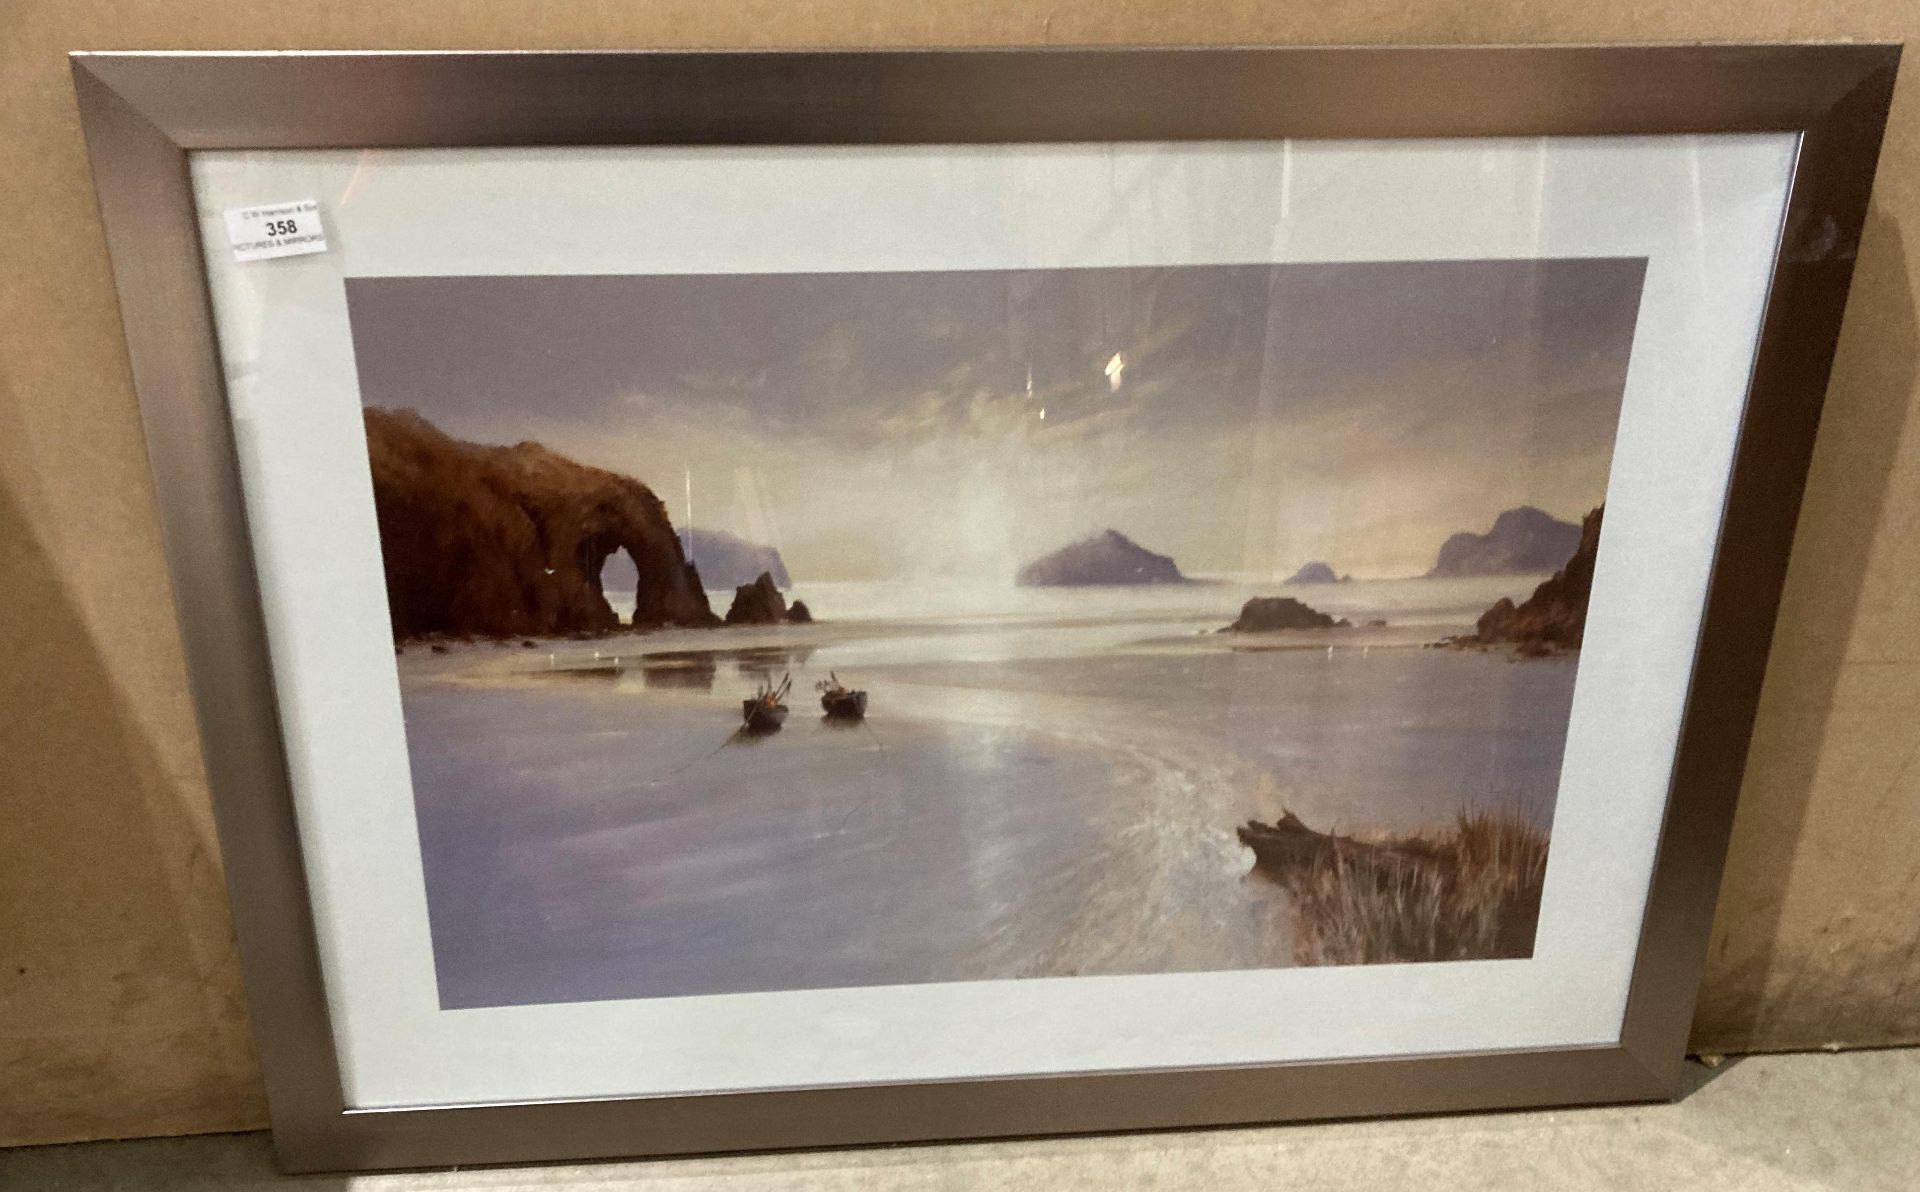 Framed print, fishing boats on the shore with a bay in the background,